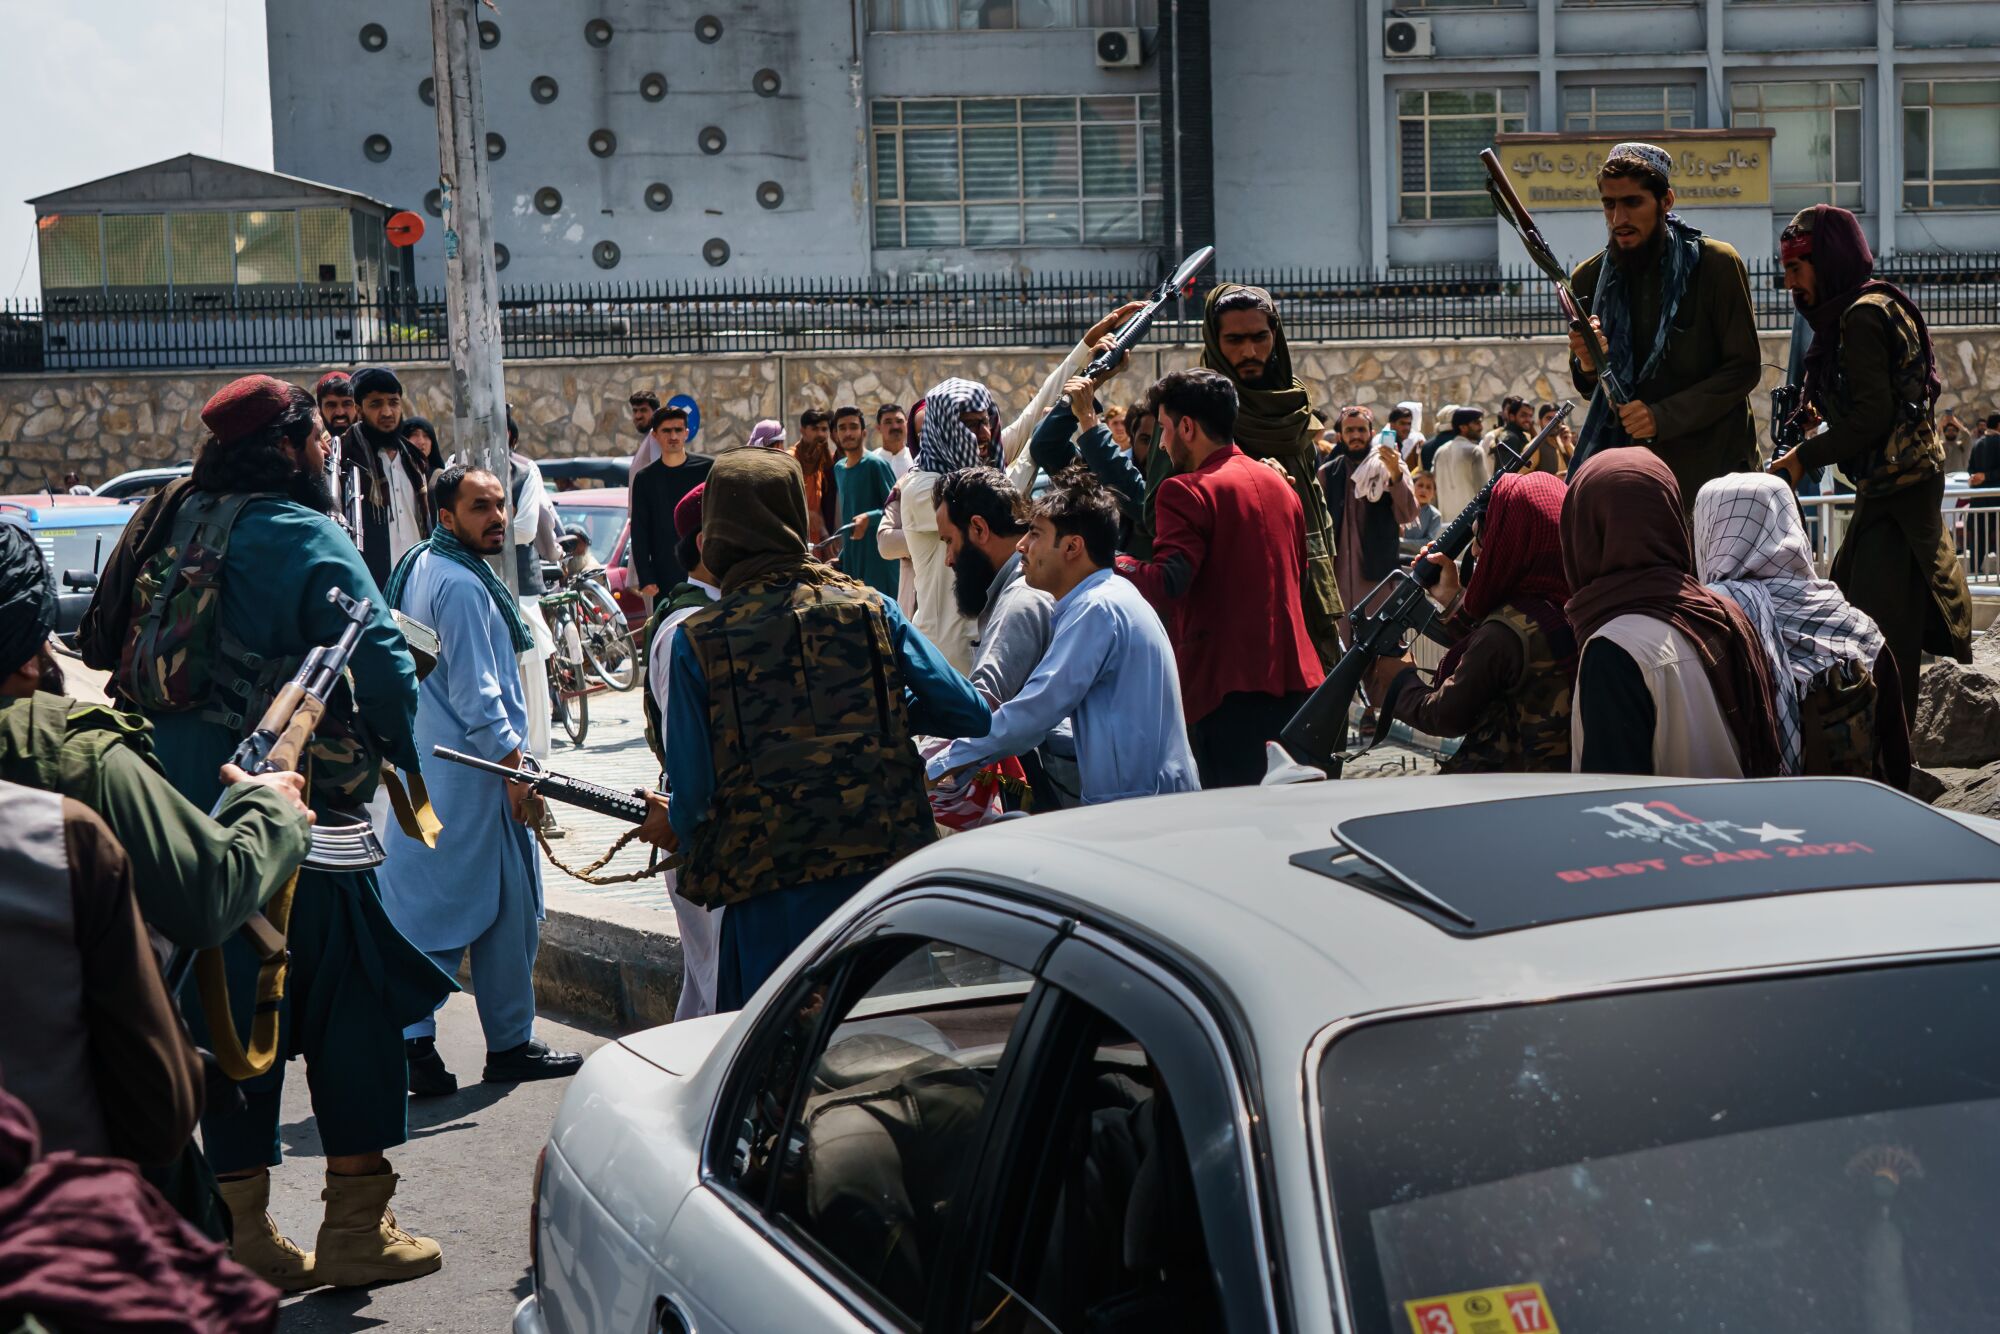 Taliban confront and push people as they try to control the crowd.